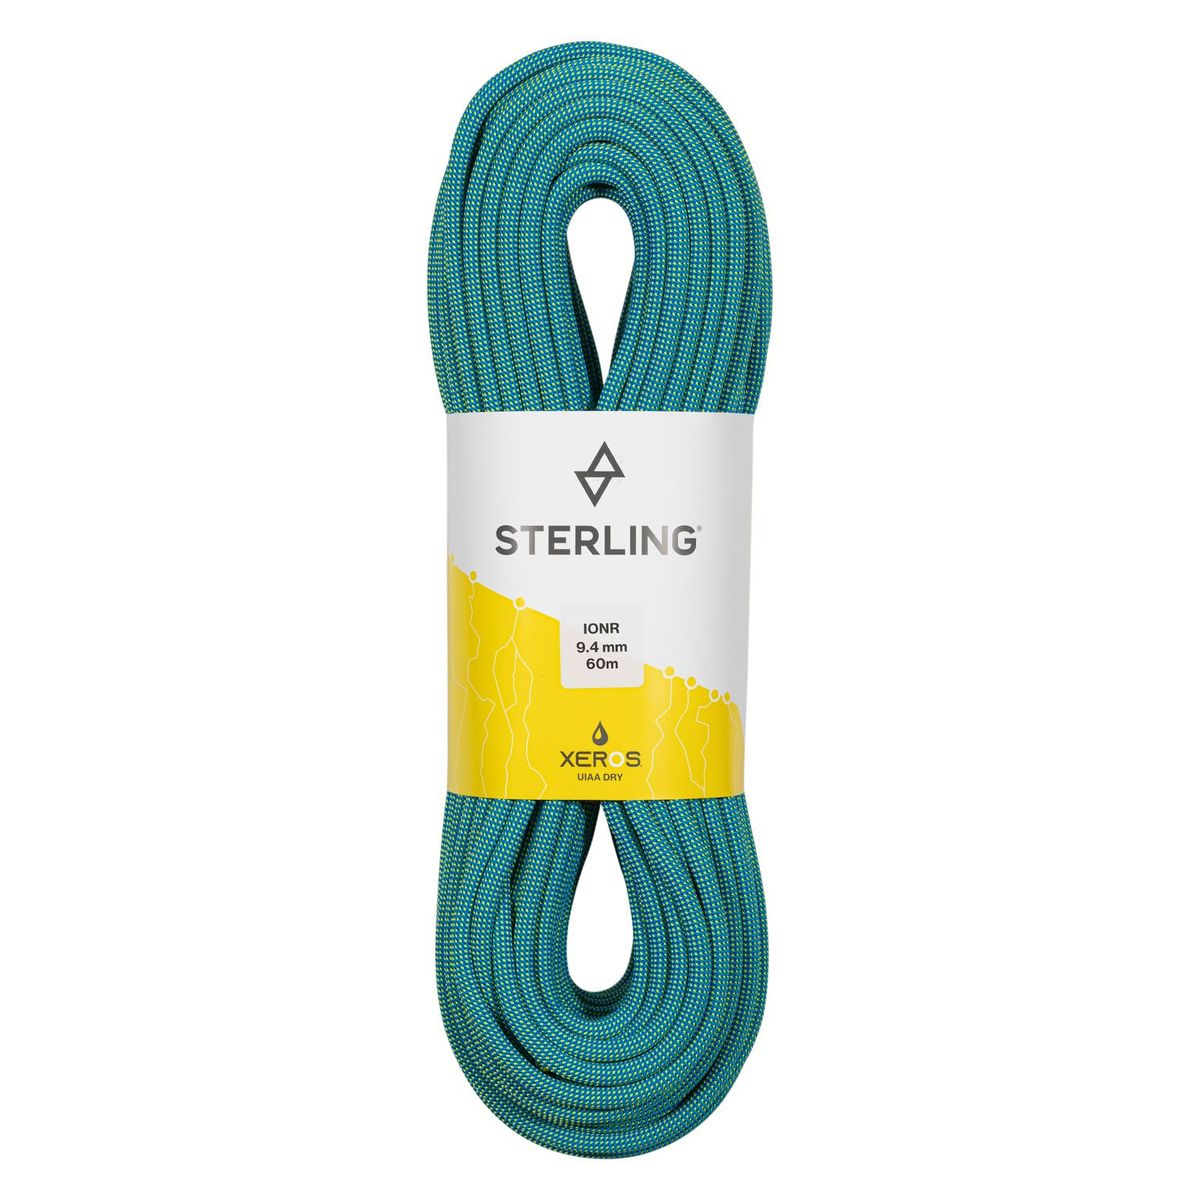 How to Choose Your Climbing Rope?